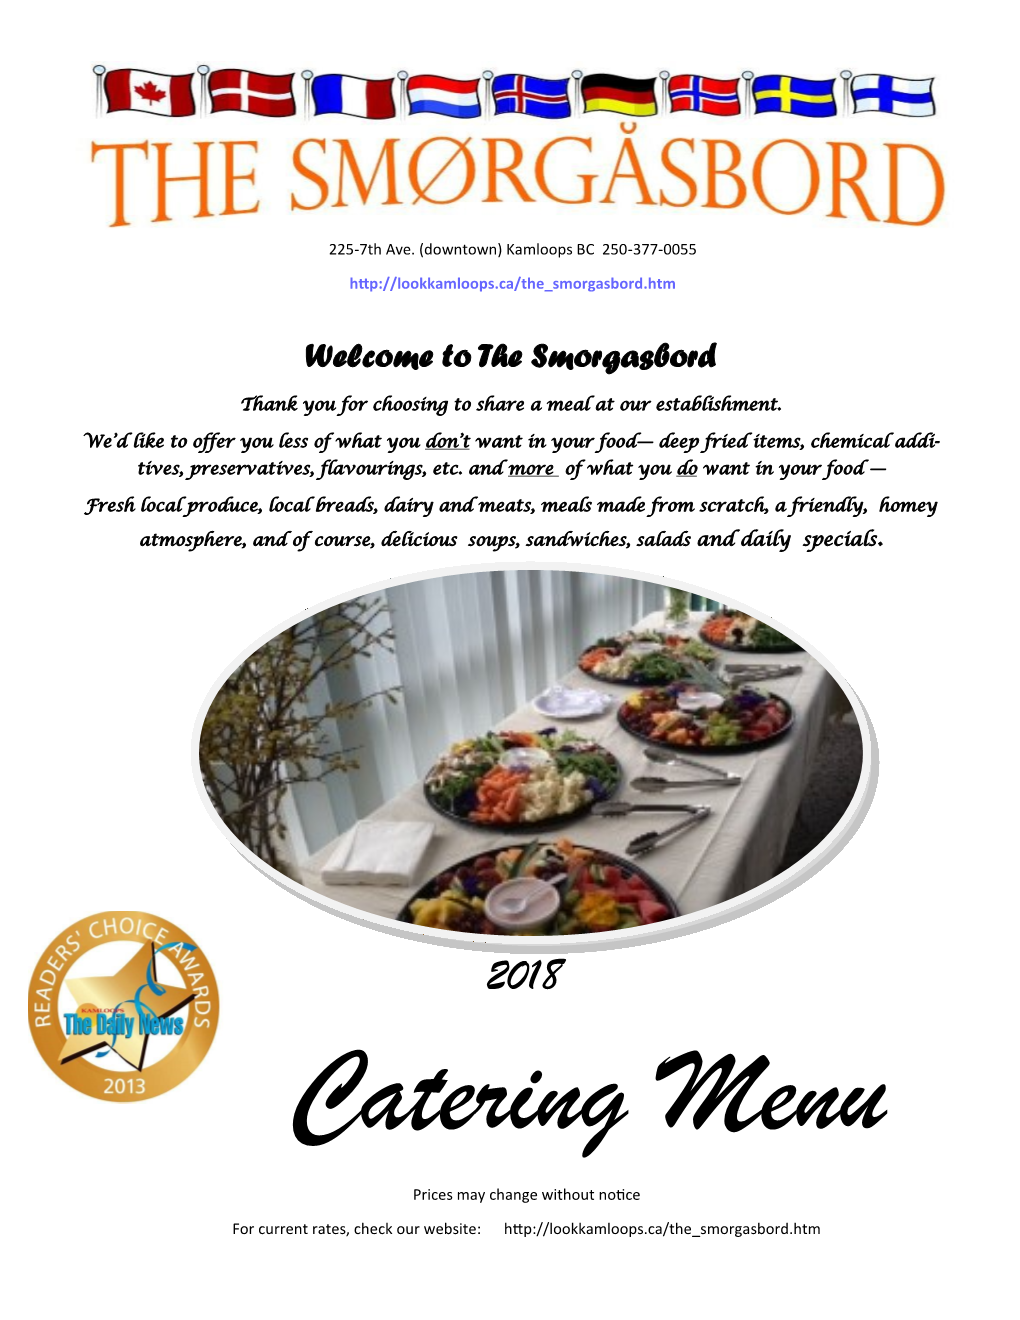 Welcome to the Smorgasbord